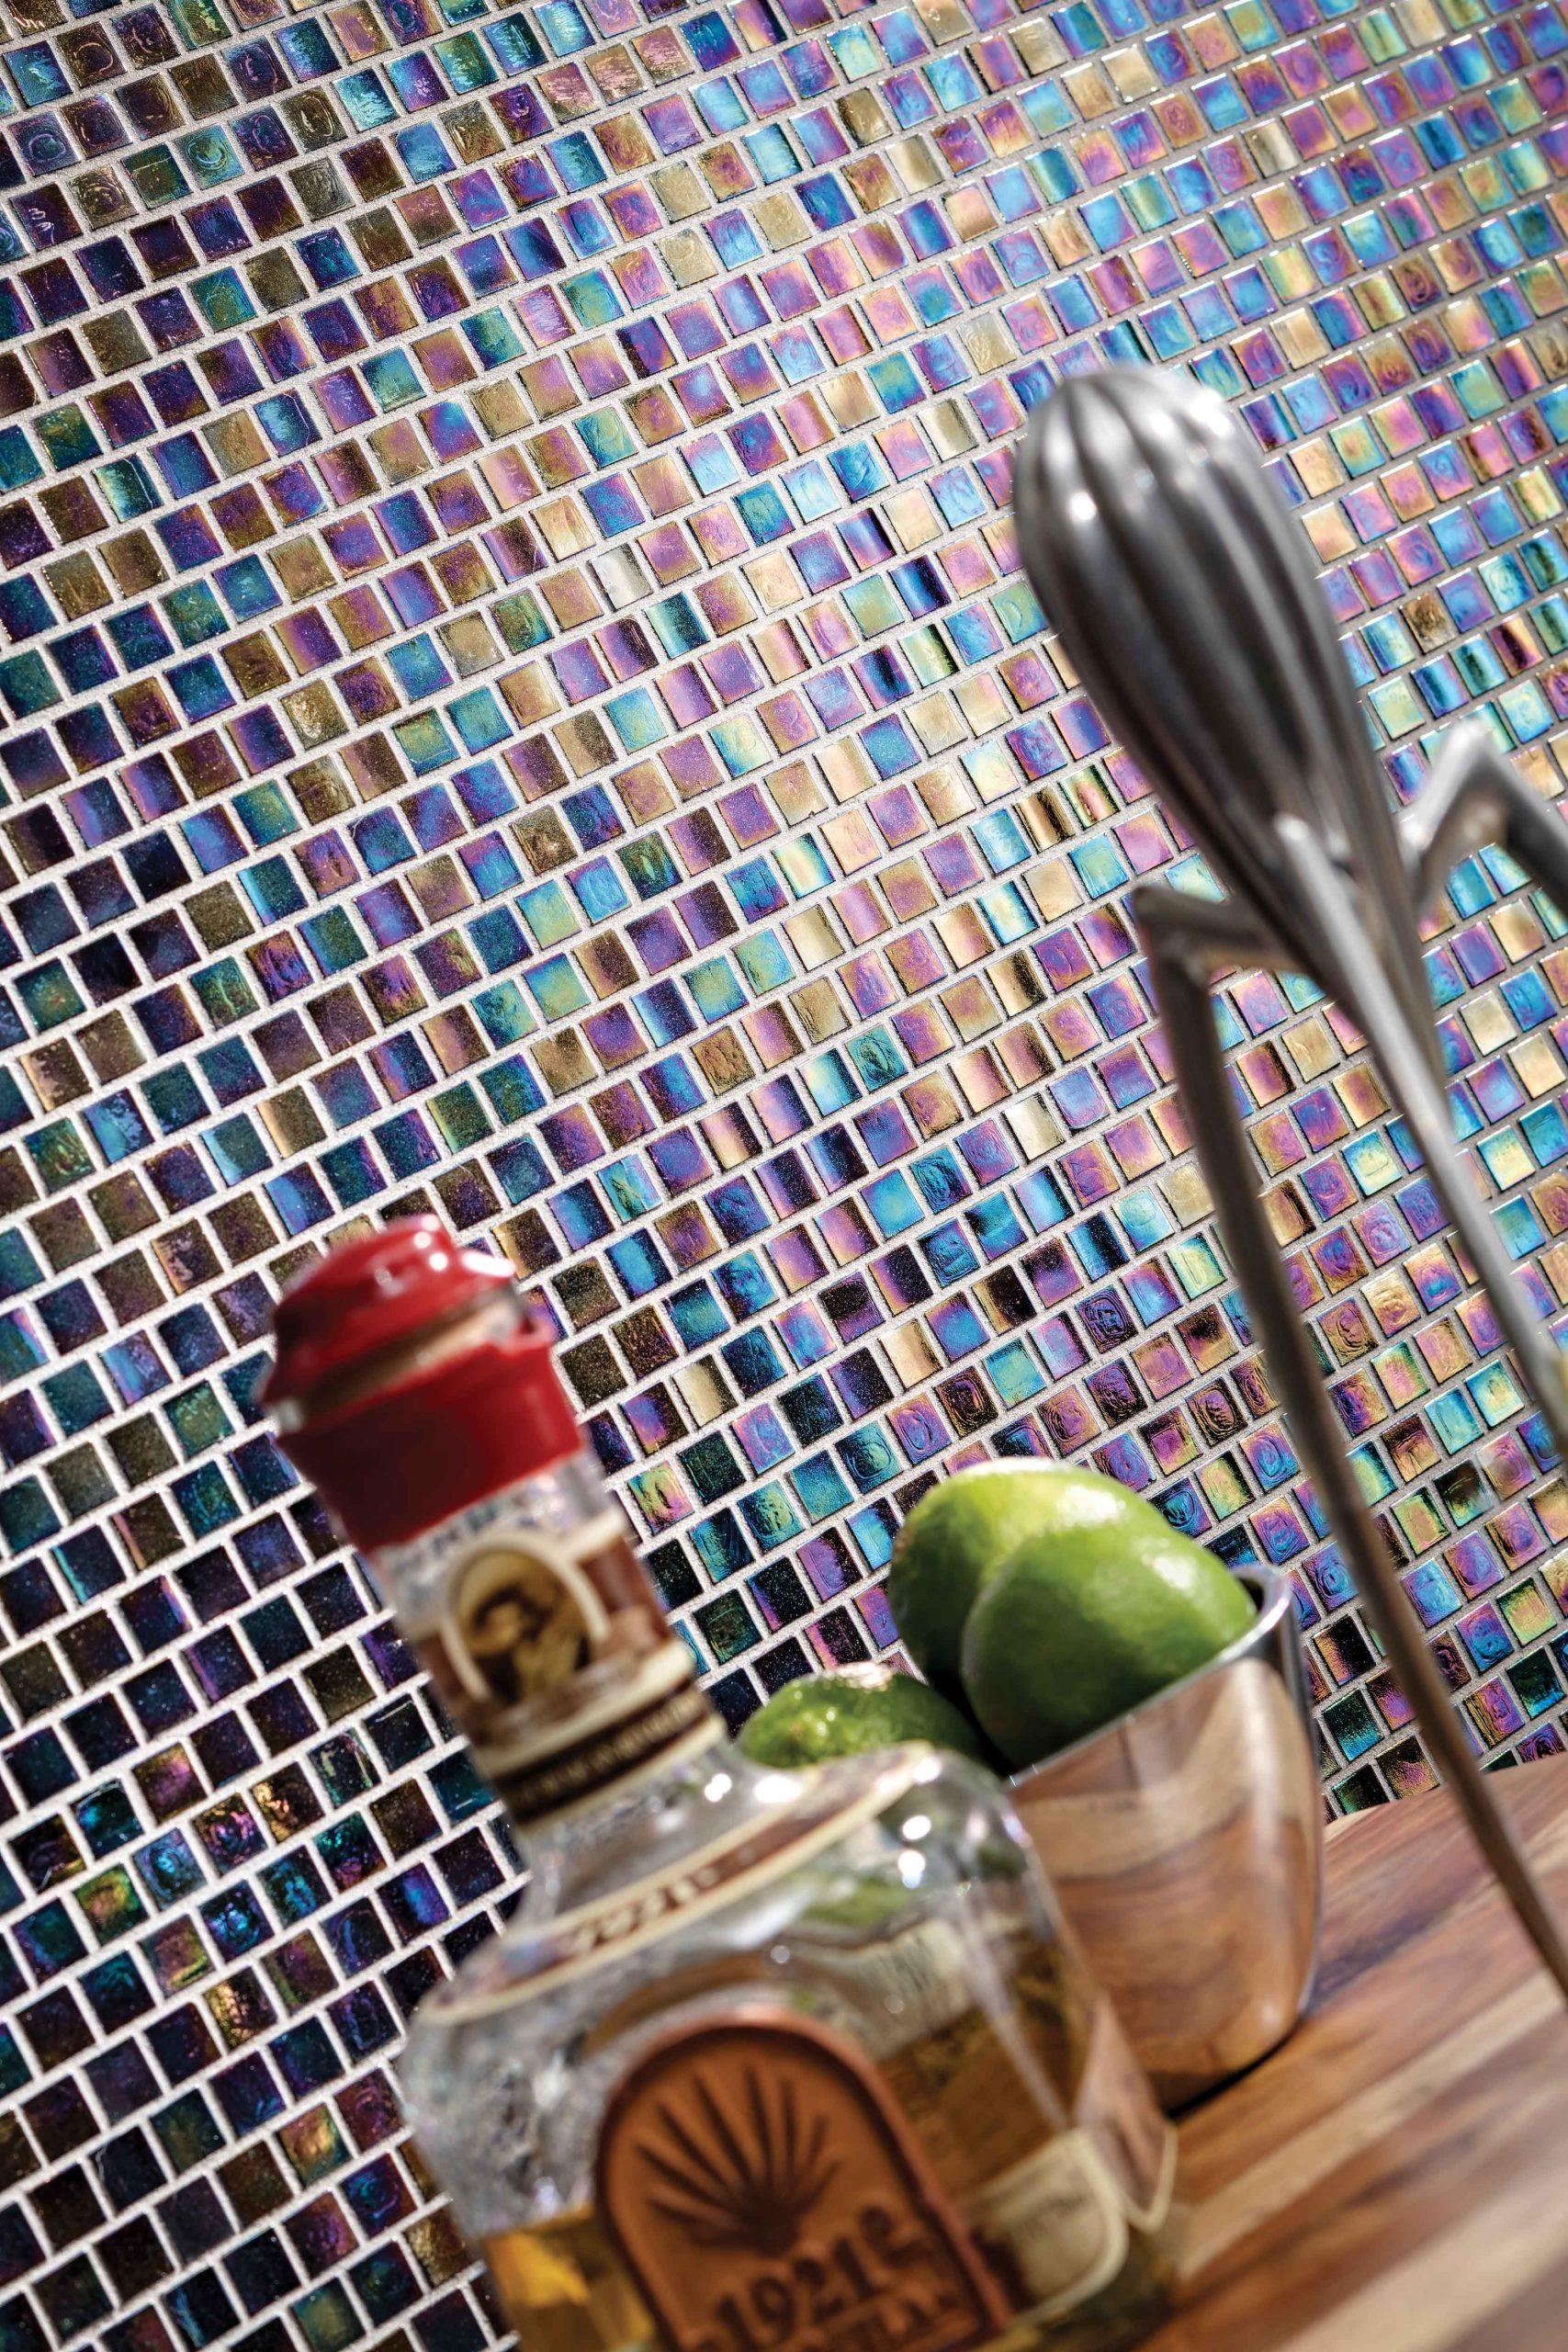 Product Nebula Glass Tile Collection | Creative Materials Corp image